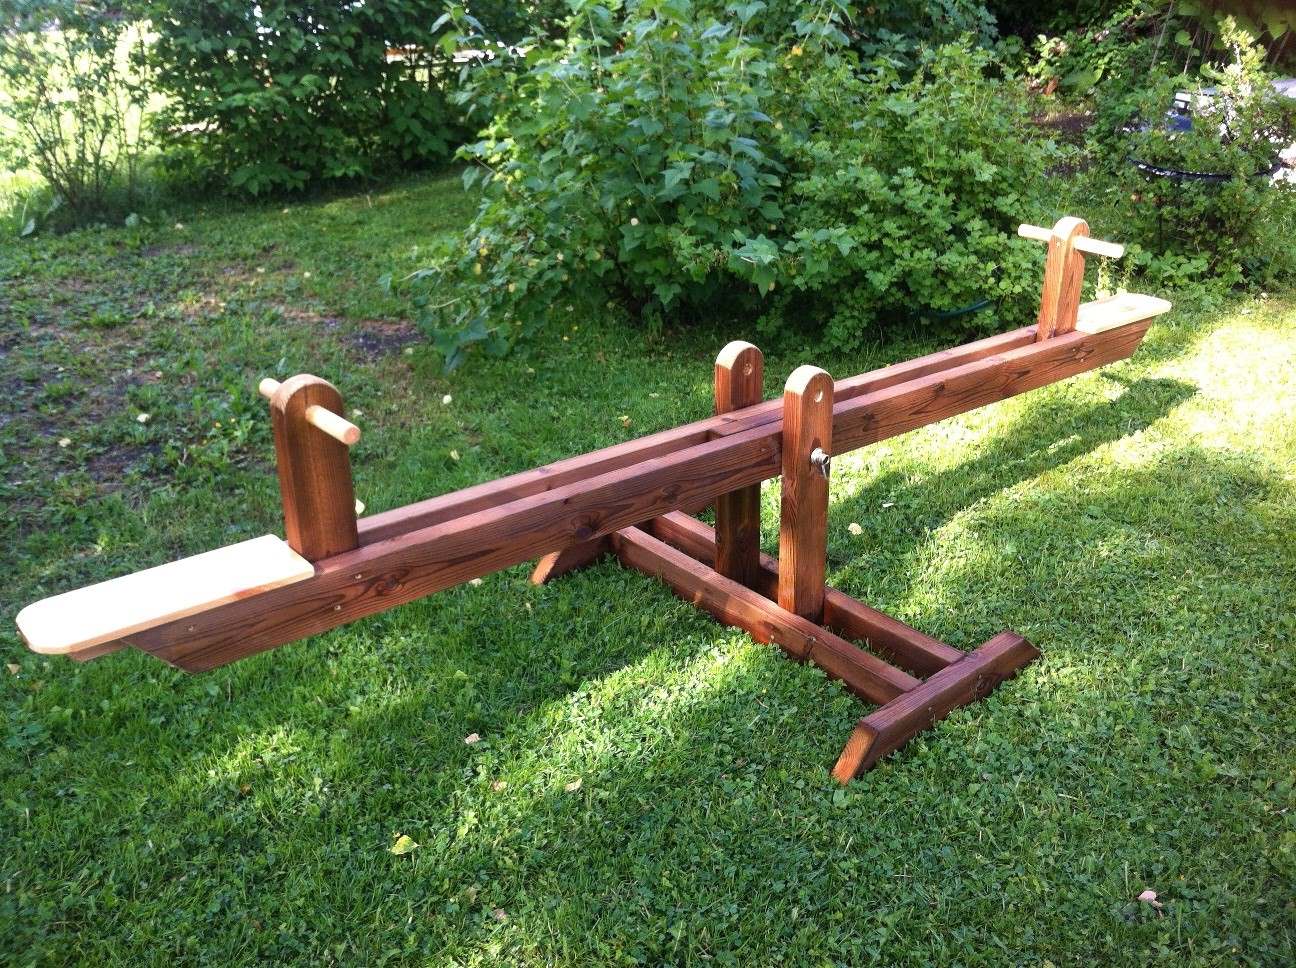 How To Make A Seesaw